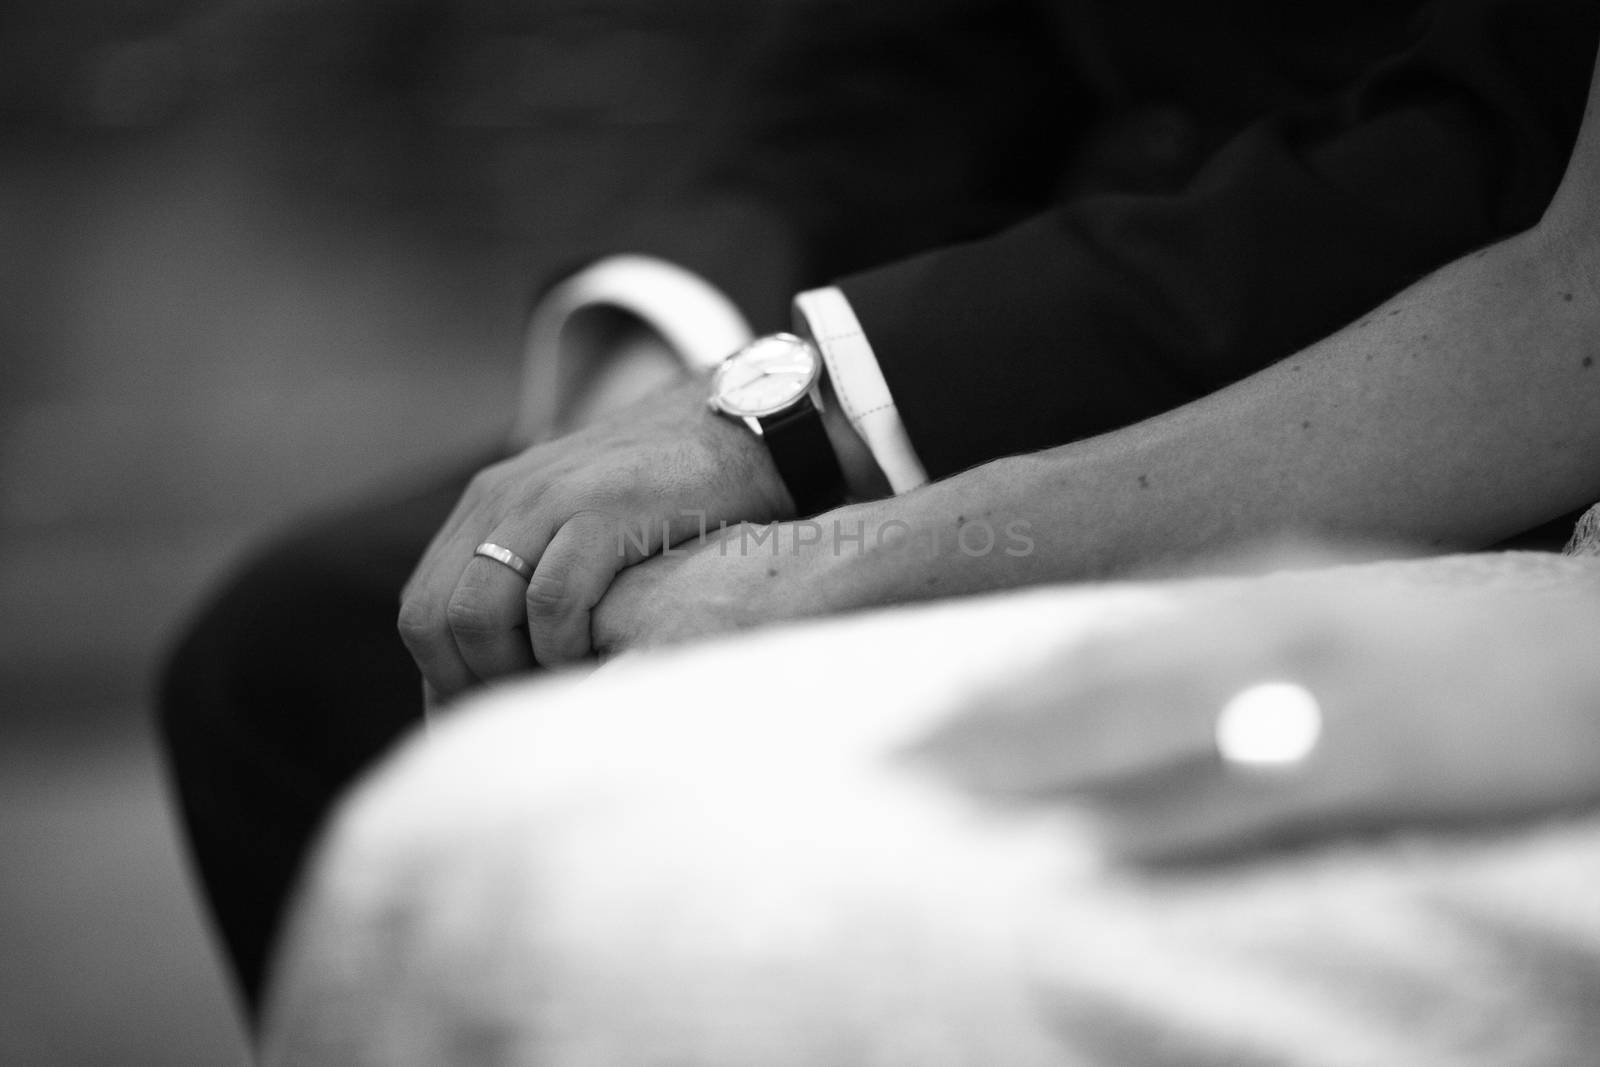 Black and white artistic digital rectangular horizontal photo of the bride wearing white wedding dress and bridegroom holding hands during church wedding marriage ceremony in Madrid Spain. Shallow depth of on foreground with background out of focus.